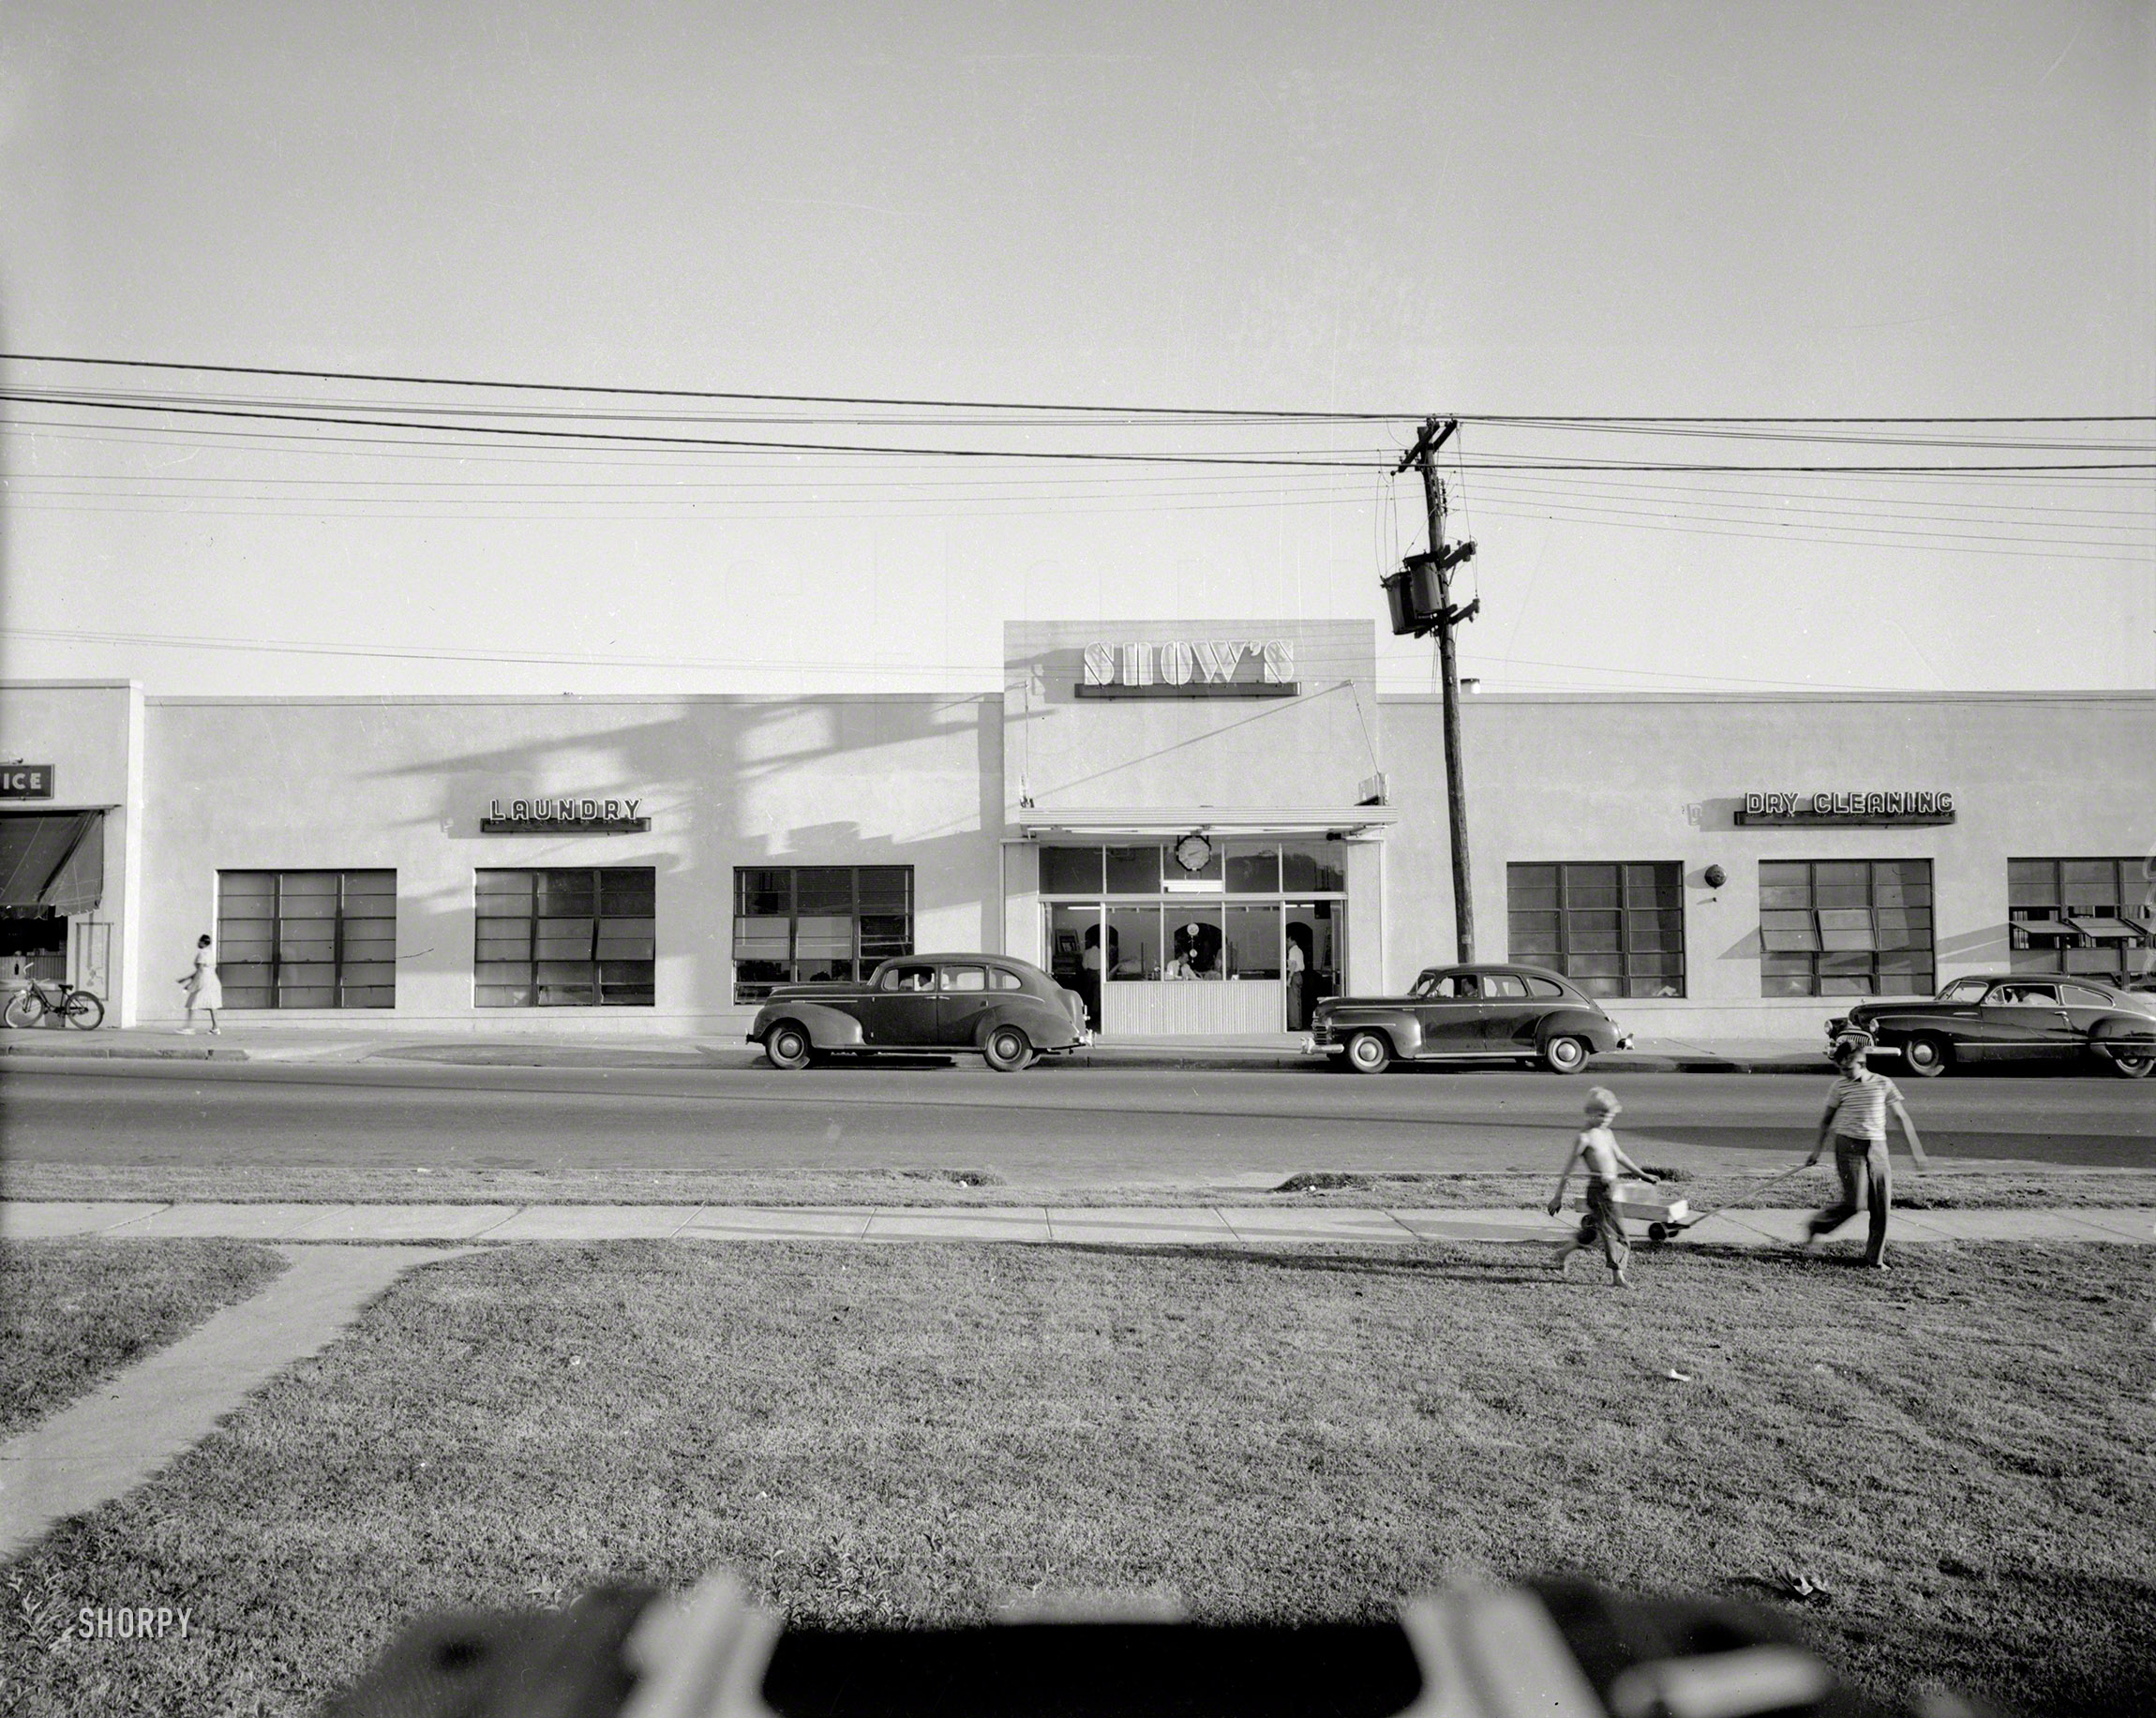 Columbus, Georgia, circa 1953. "Snow's Laundry." With plenty of free parking for your car, bike or wagon. 4x5 negative from the News Archive. View full size.
